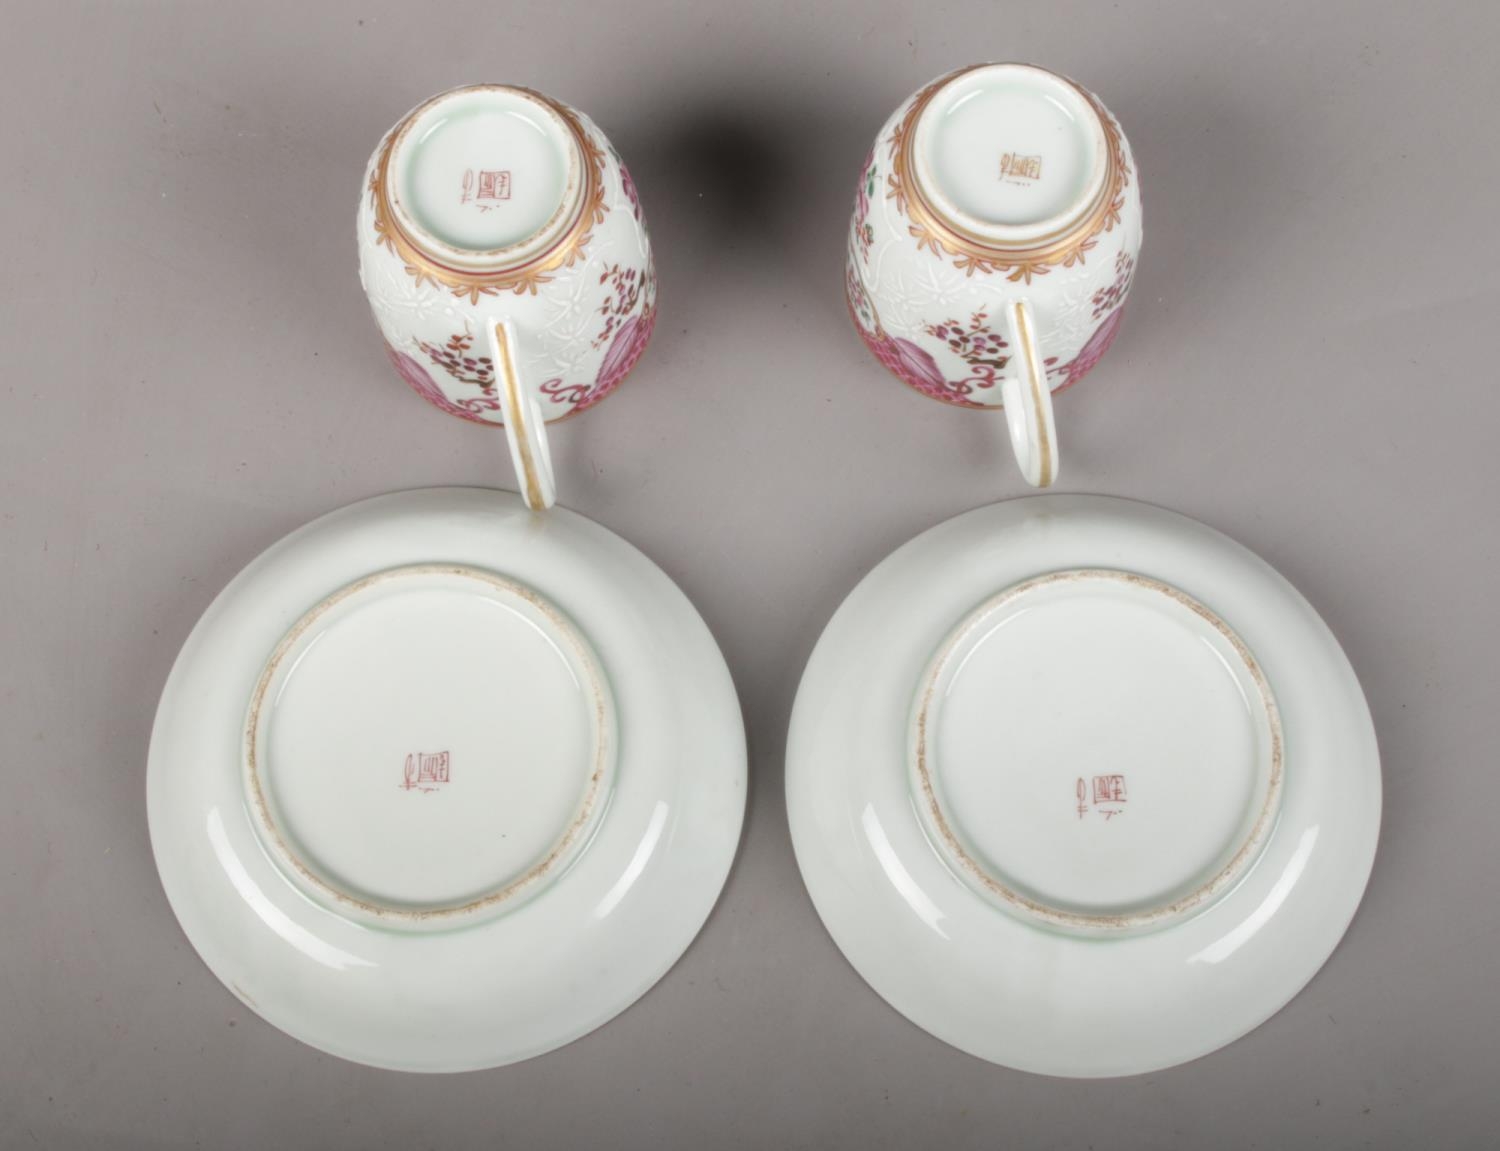 A matching pair of hand-painted 19th century Samson porcelain cups and saucers. Painted in the - Image 2 of 2